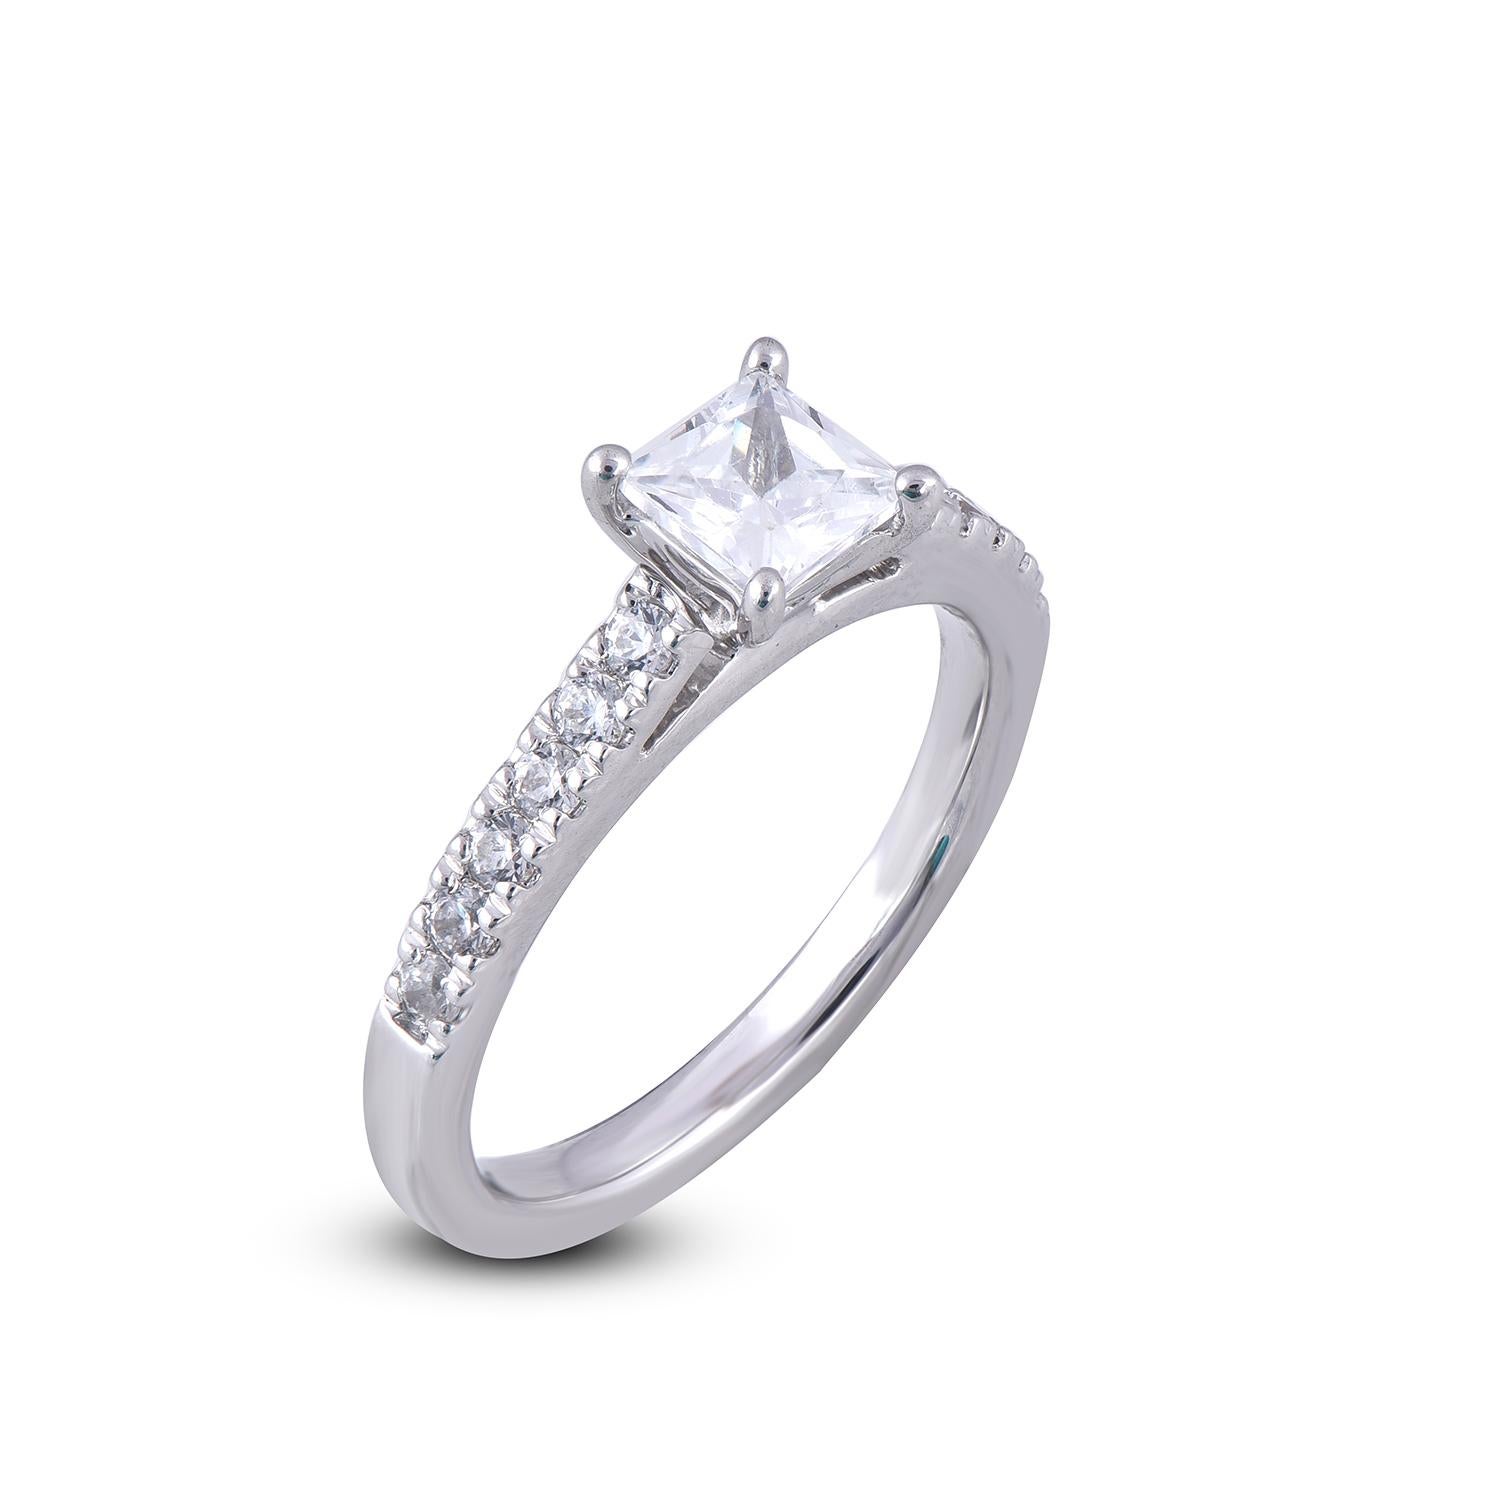 This diamond engagement ring is expertly crafted in 18 Karat White Gold and features 0.75 ct centre Princess Diamond and 0.25 ct of diamond on shank lined diamonds set in prong setting. The diamond are natural, not treated and dazzles in G-H color